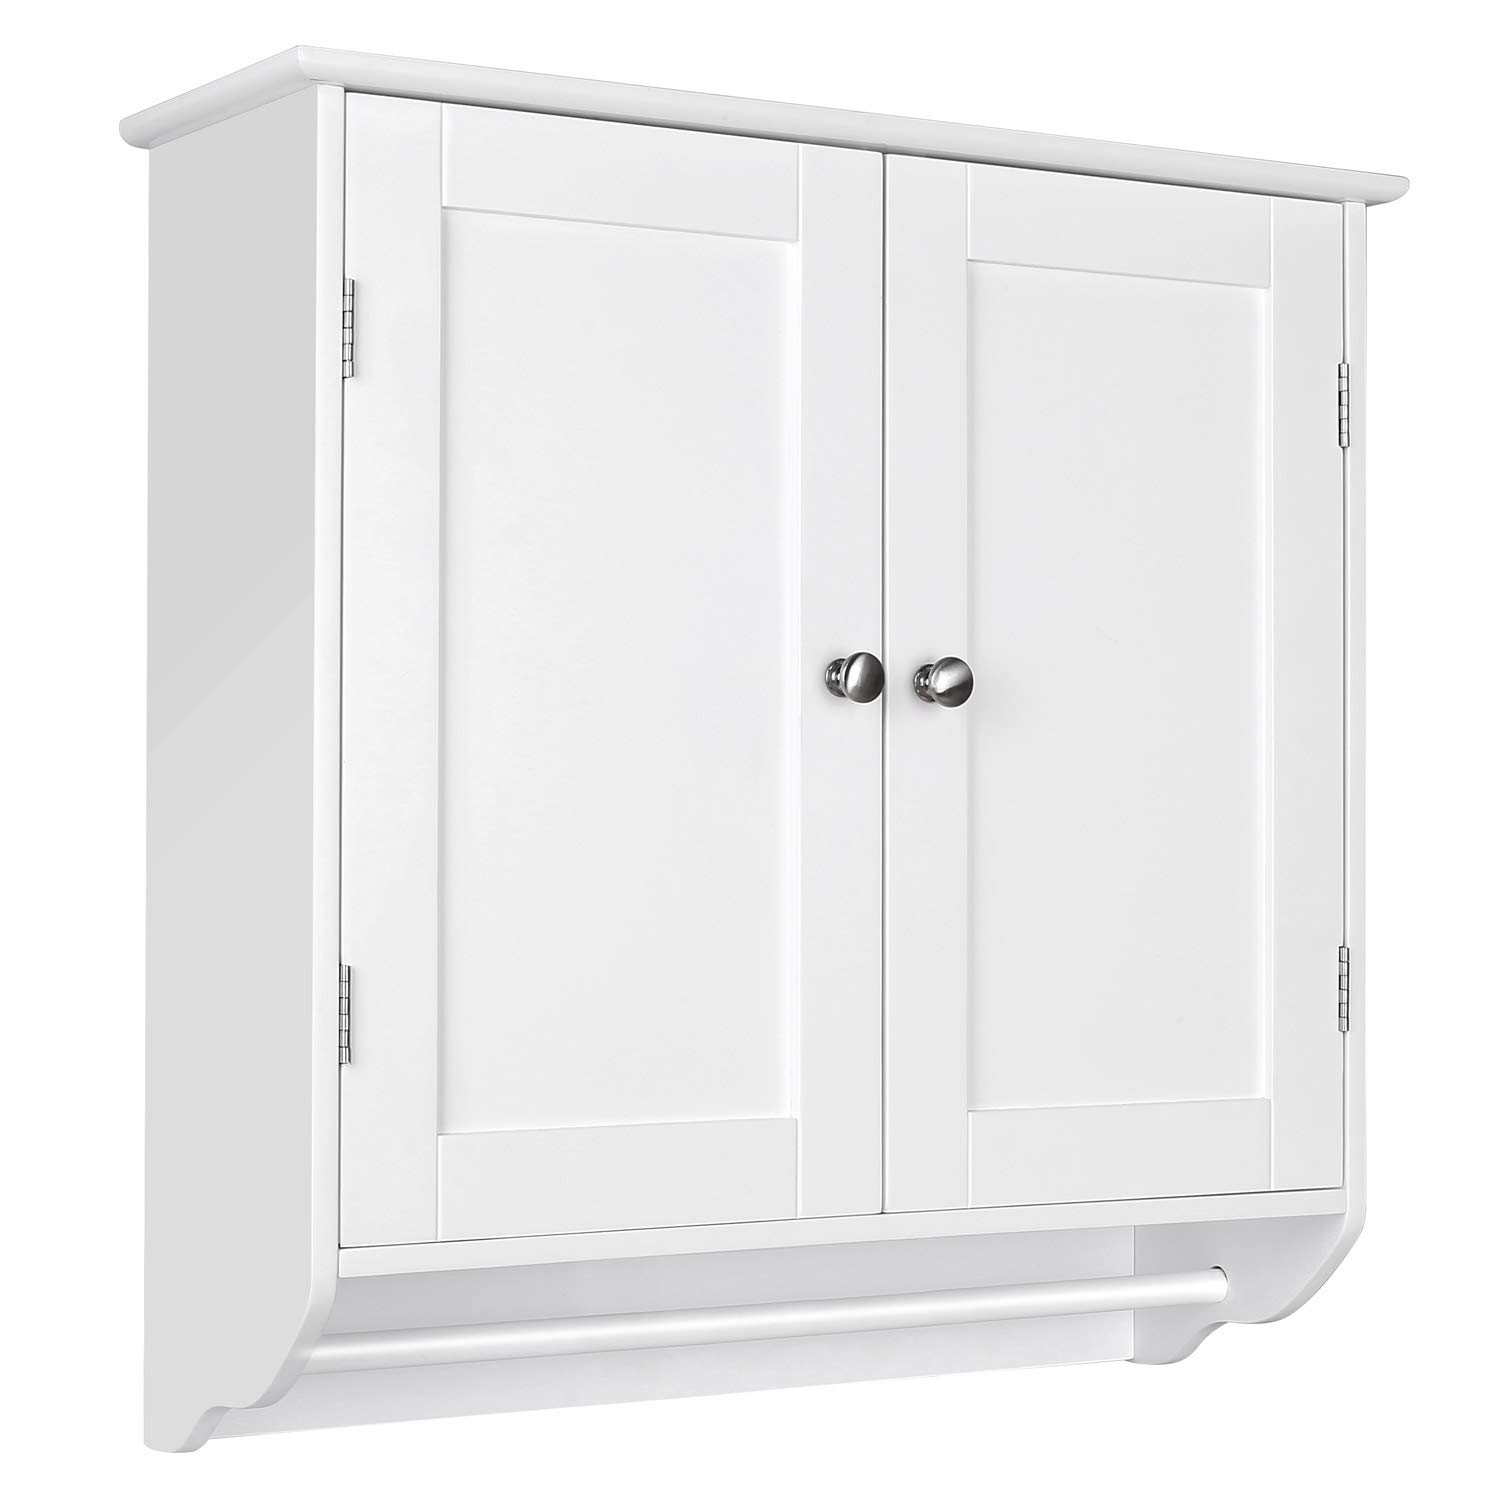 HOMFA Bathroom Wall Cabinet, Over The Toilet Space Saver